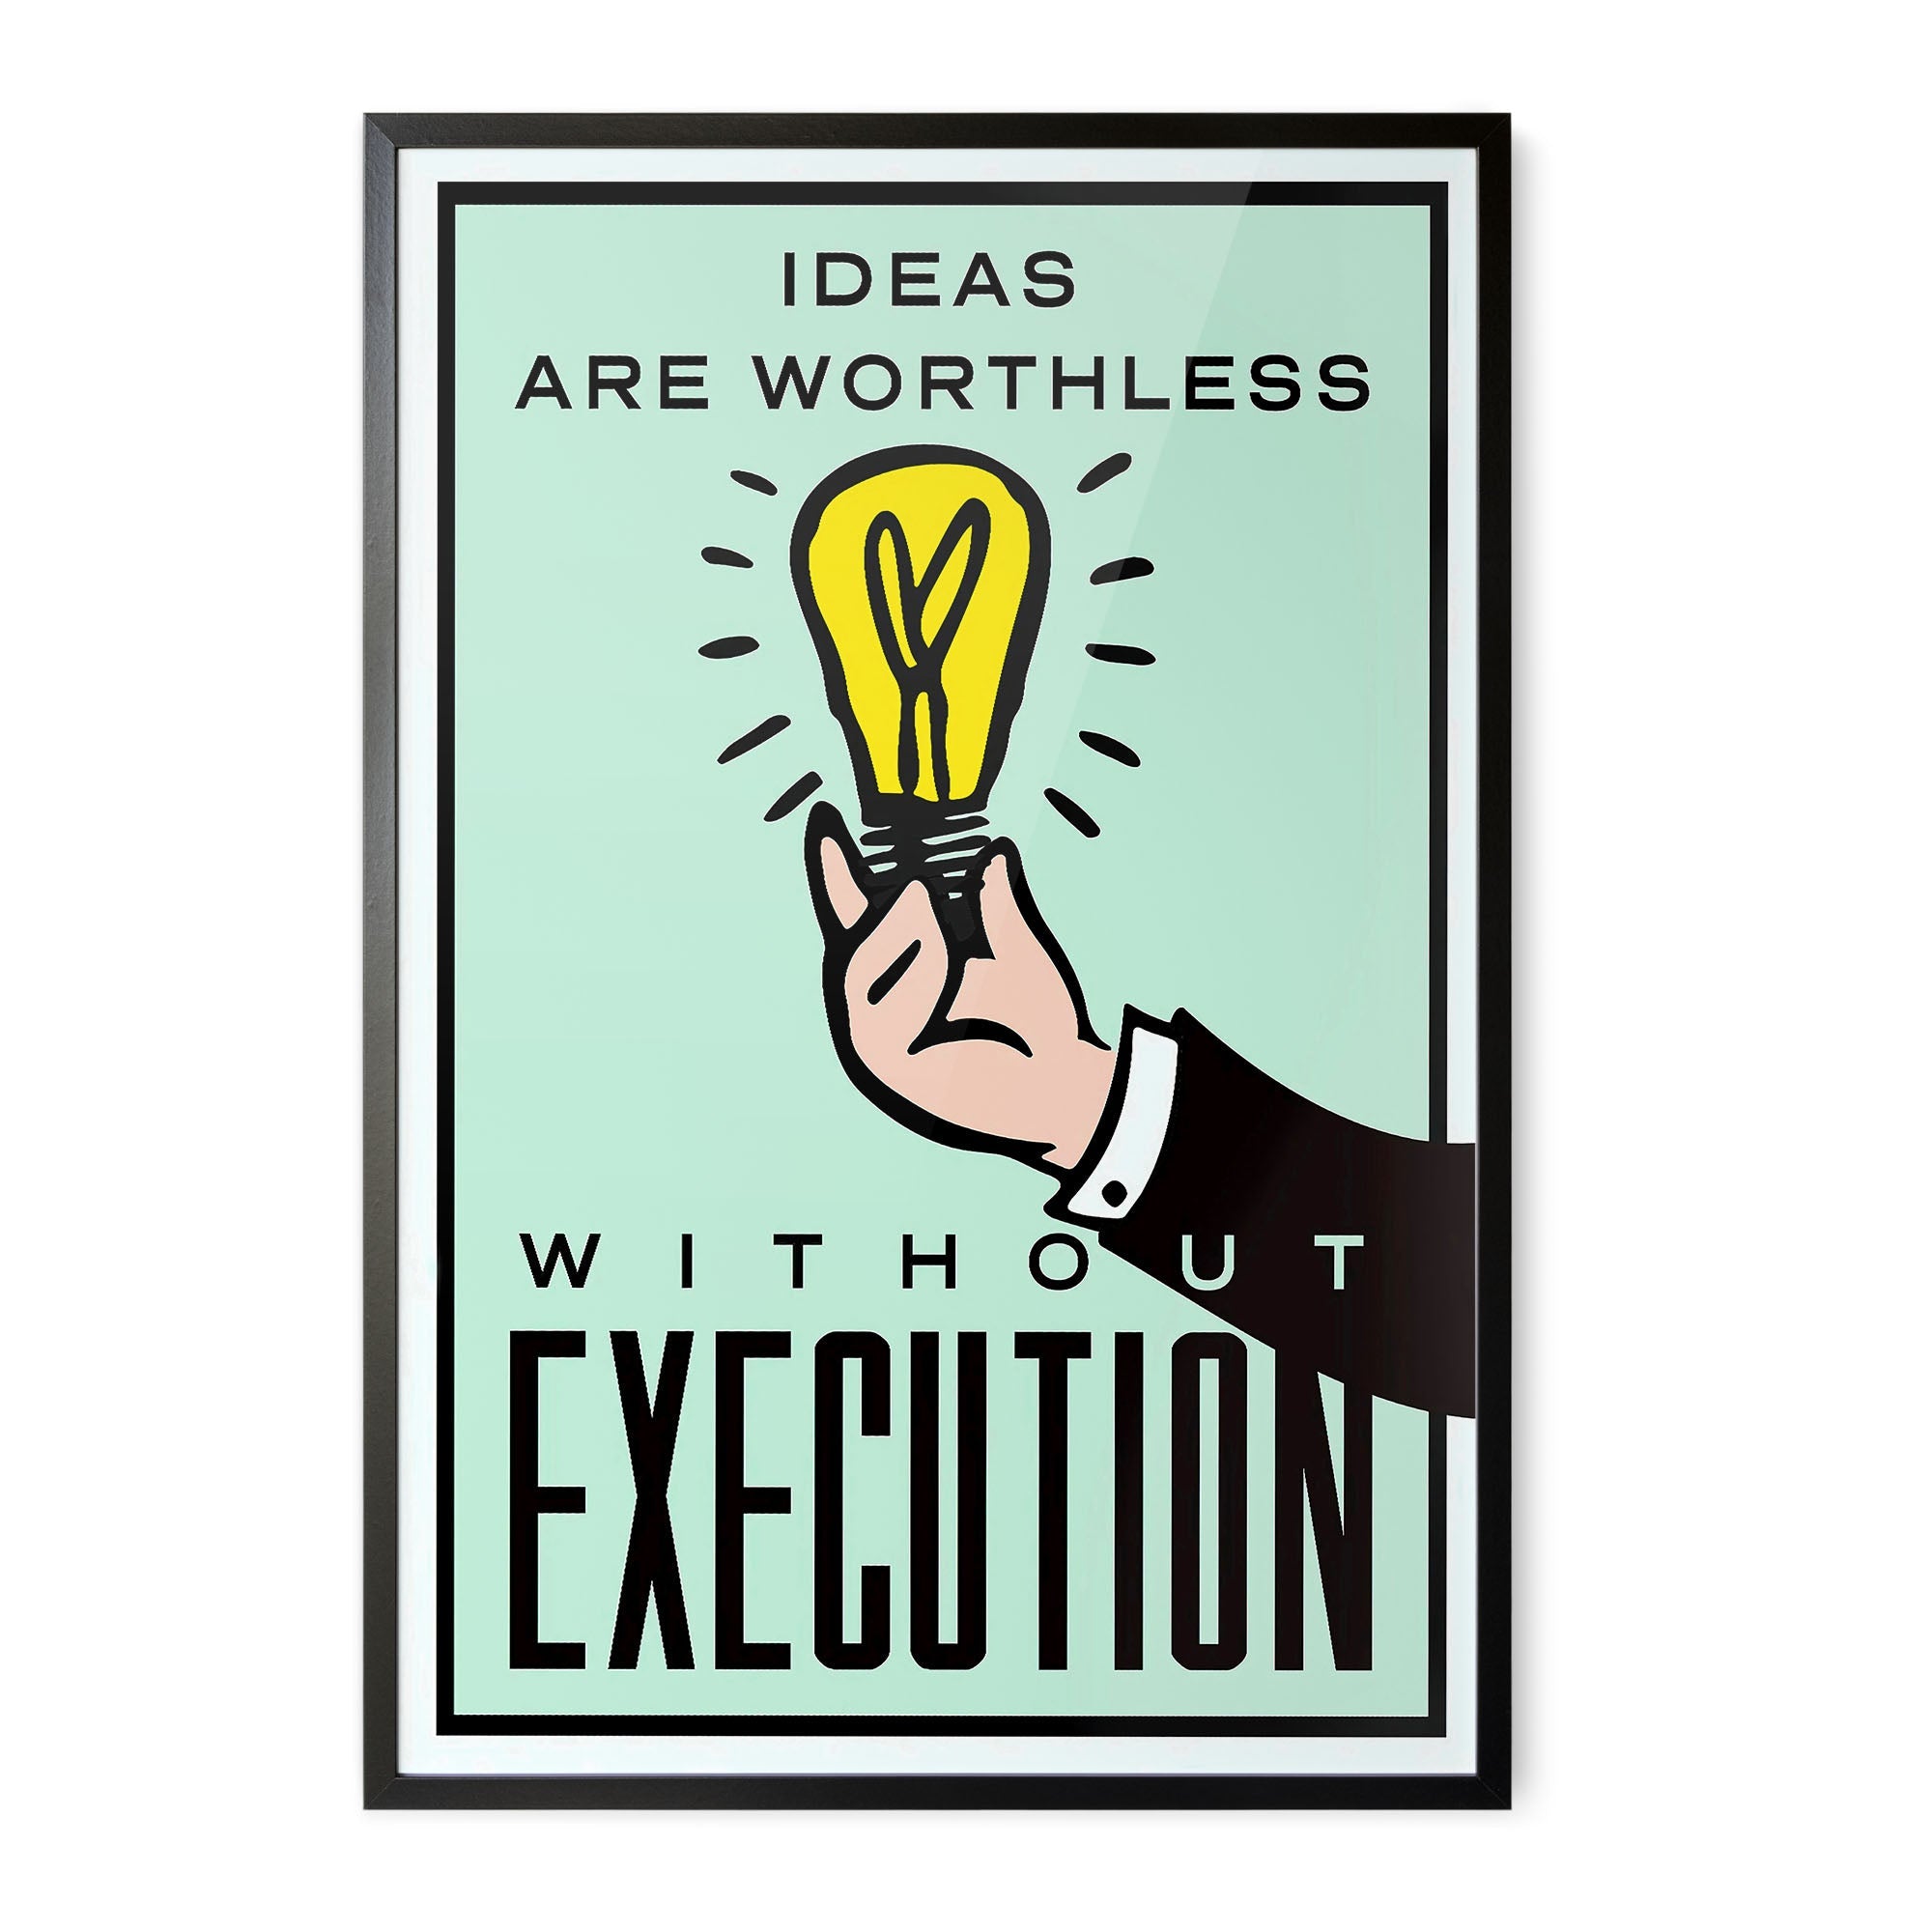 Without Execution